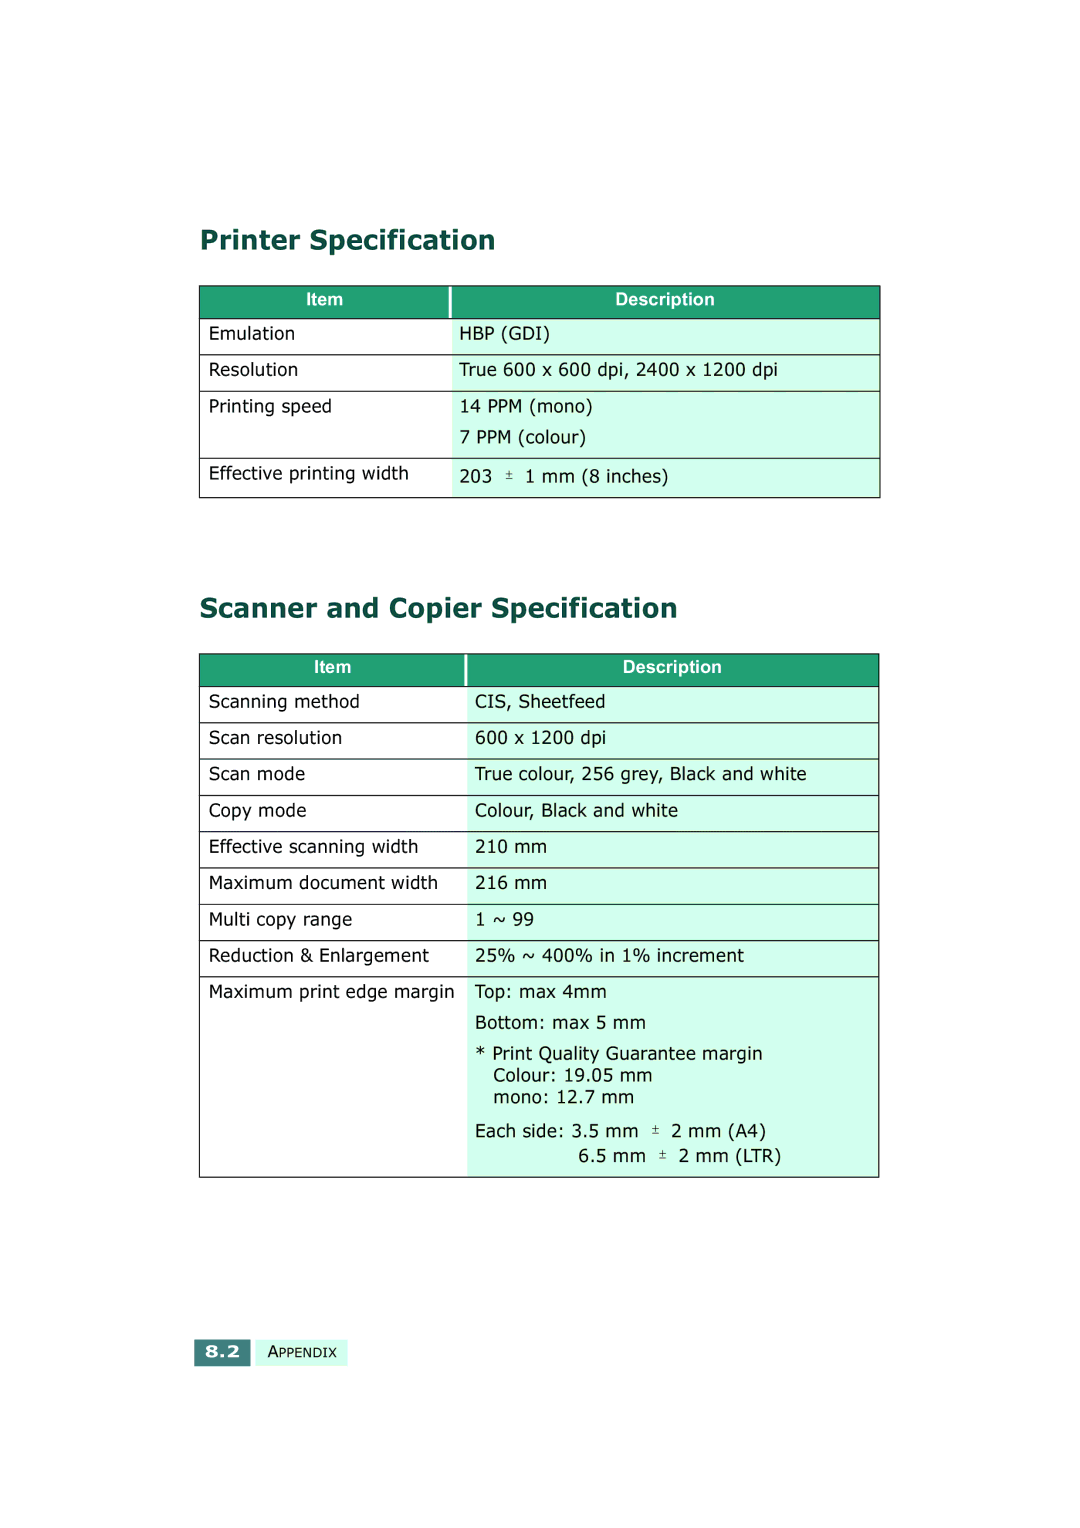 Samsung SF-430 manual Printer Specification, Scanner and Copier Specification, Emulation 